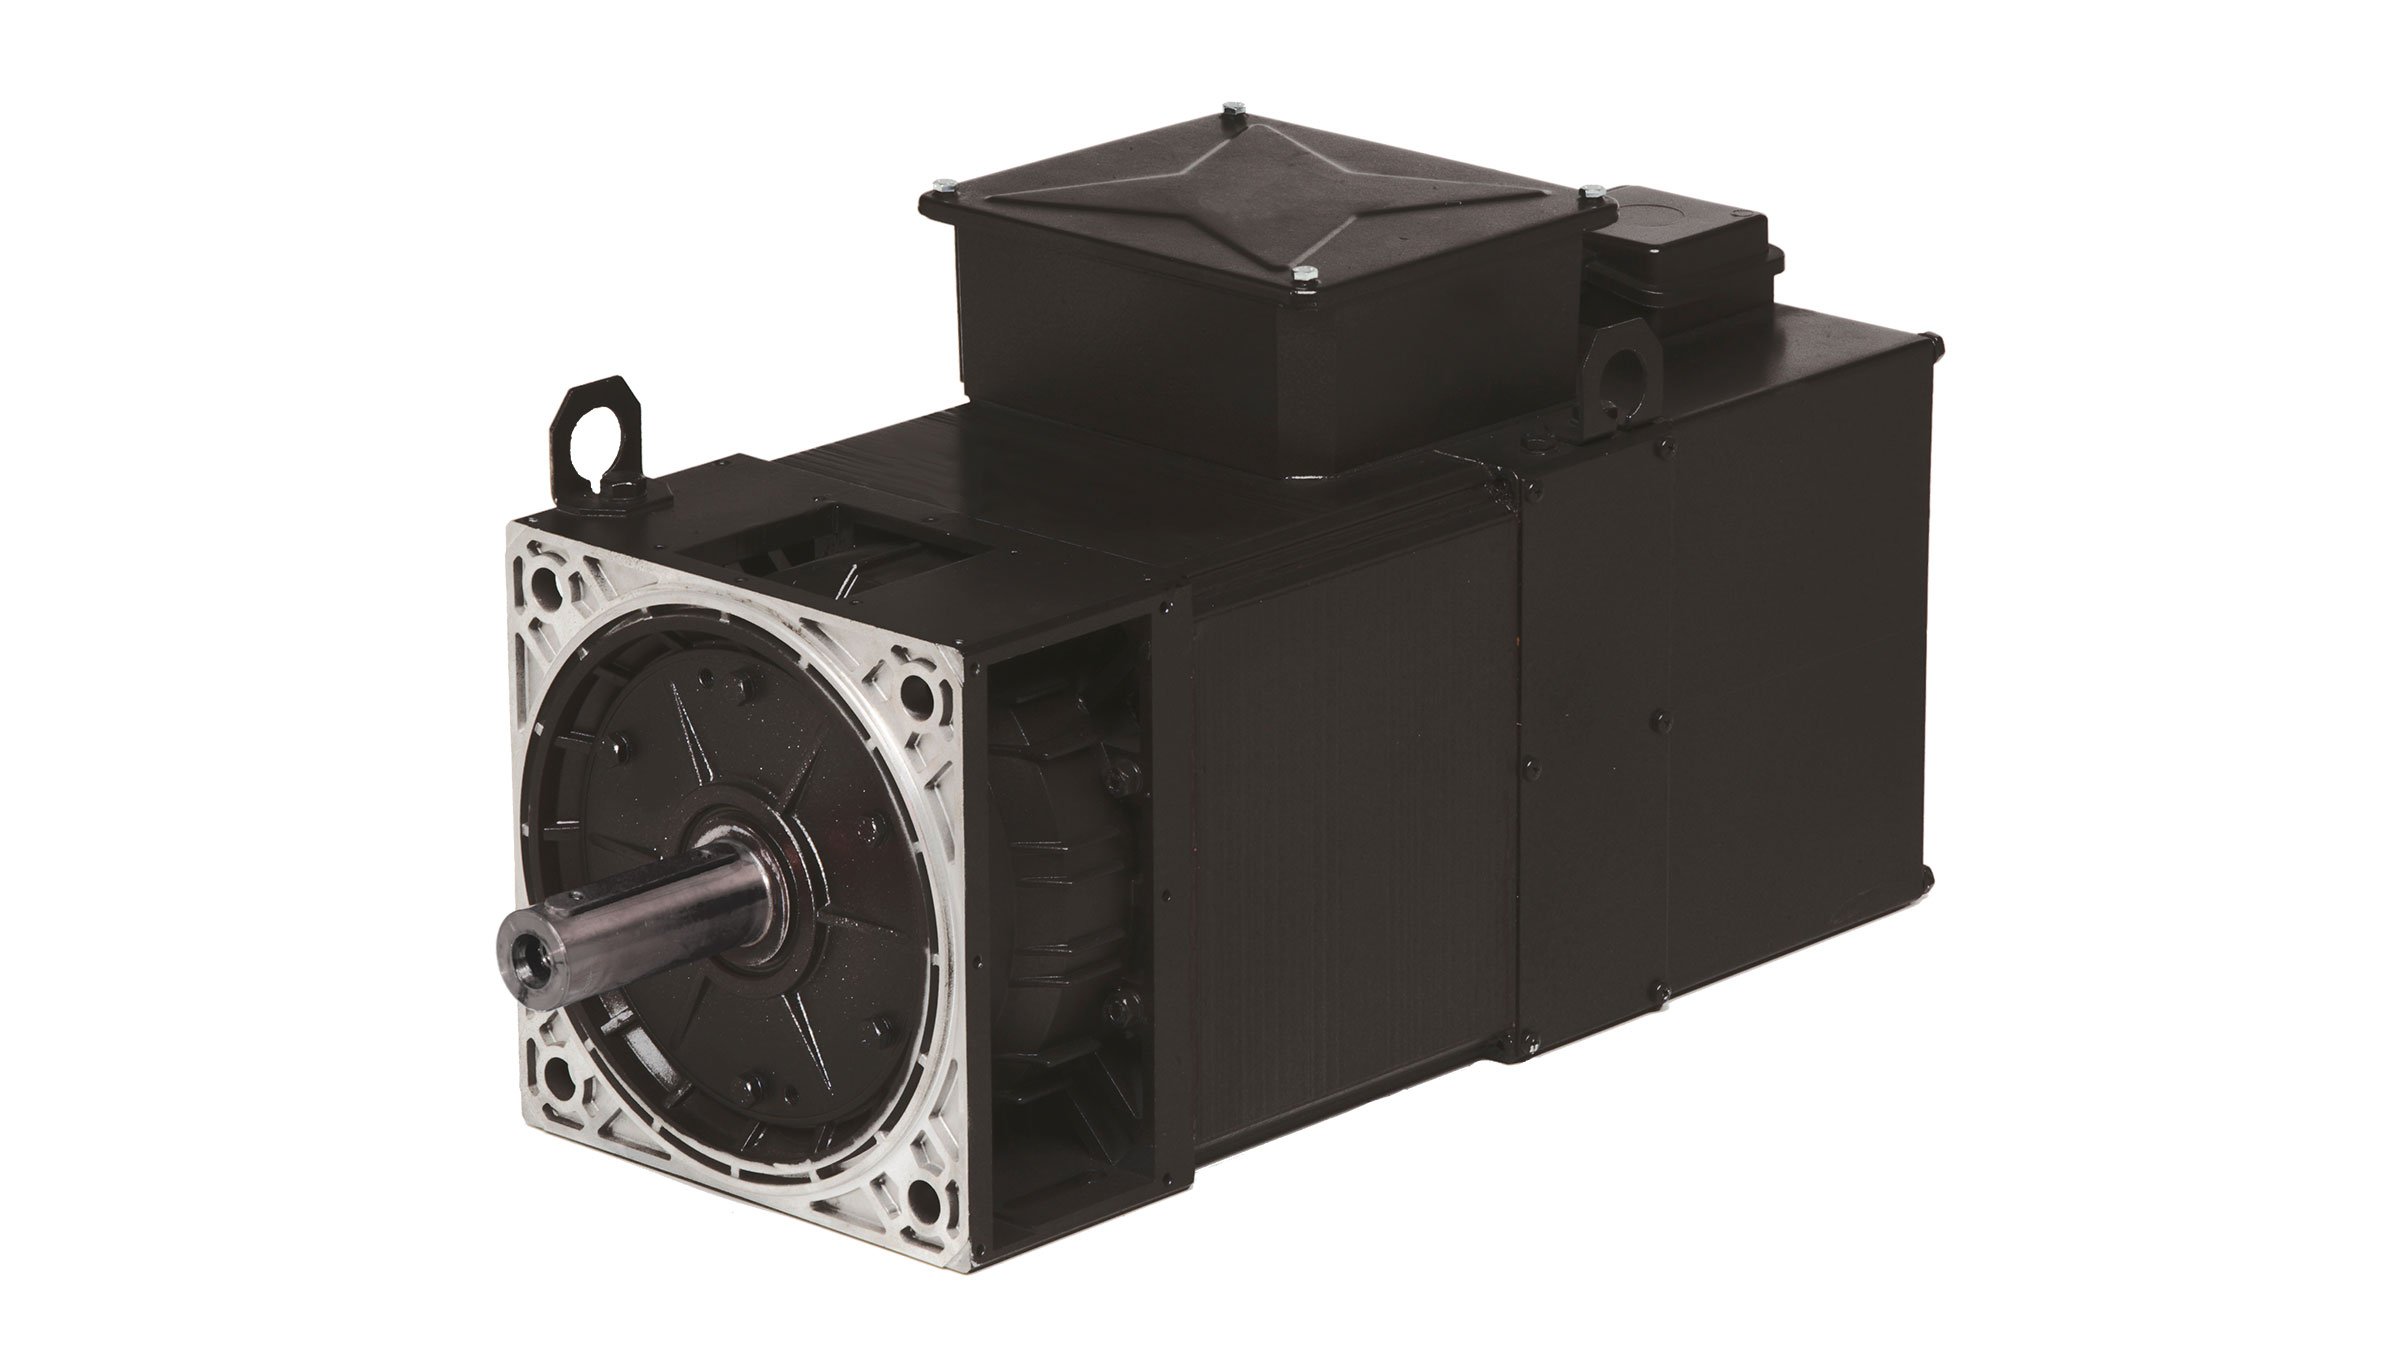 An isometric view of a Kinetix MMA motor in the small frame format